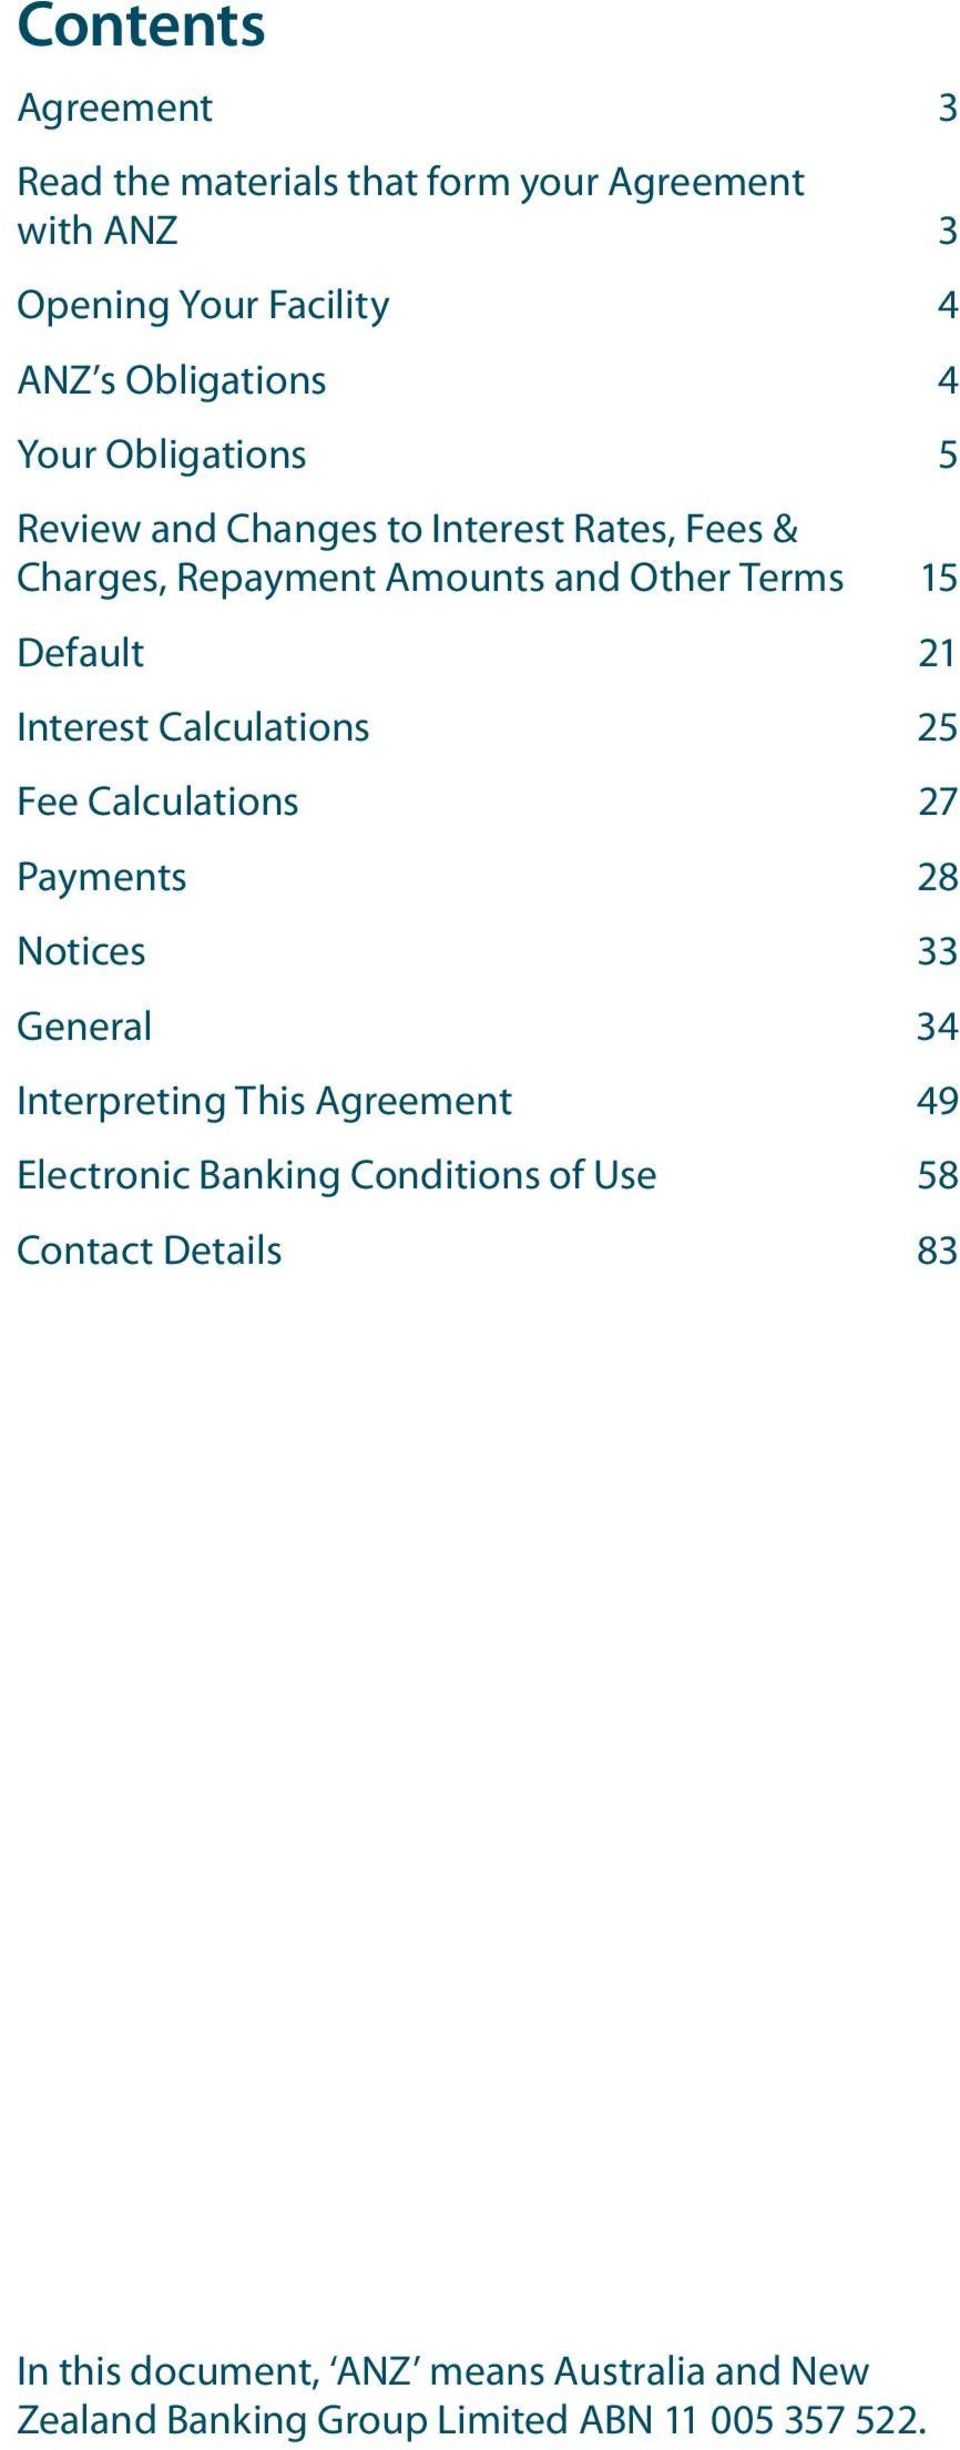 Calculations 25 Fee Calculations 27 Payments 28 Notices 33 General 34 Interpreting This Agreement 49 Electronic Banking